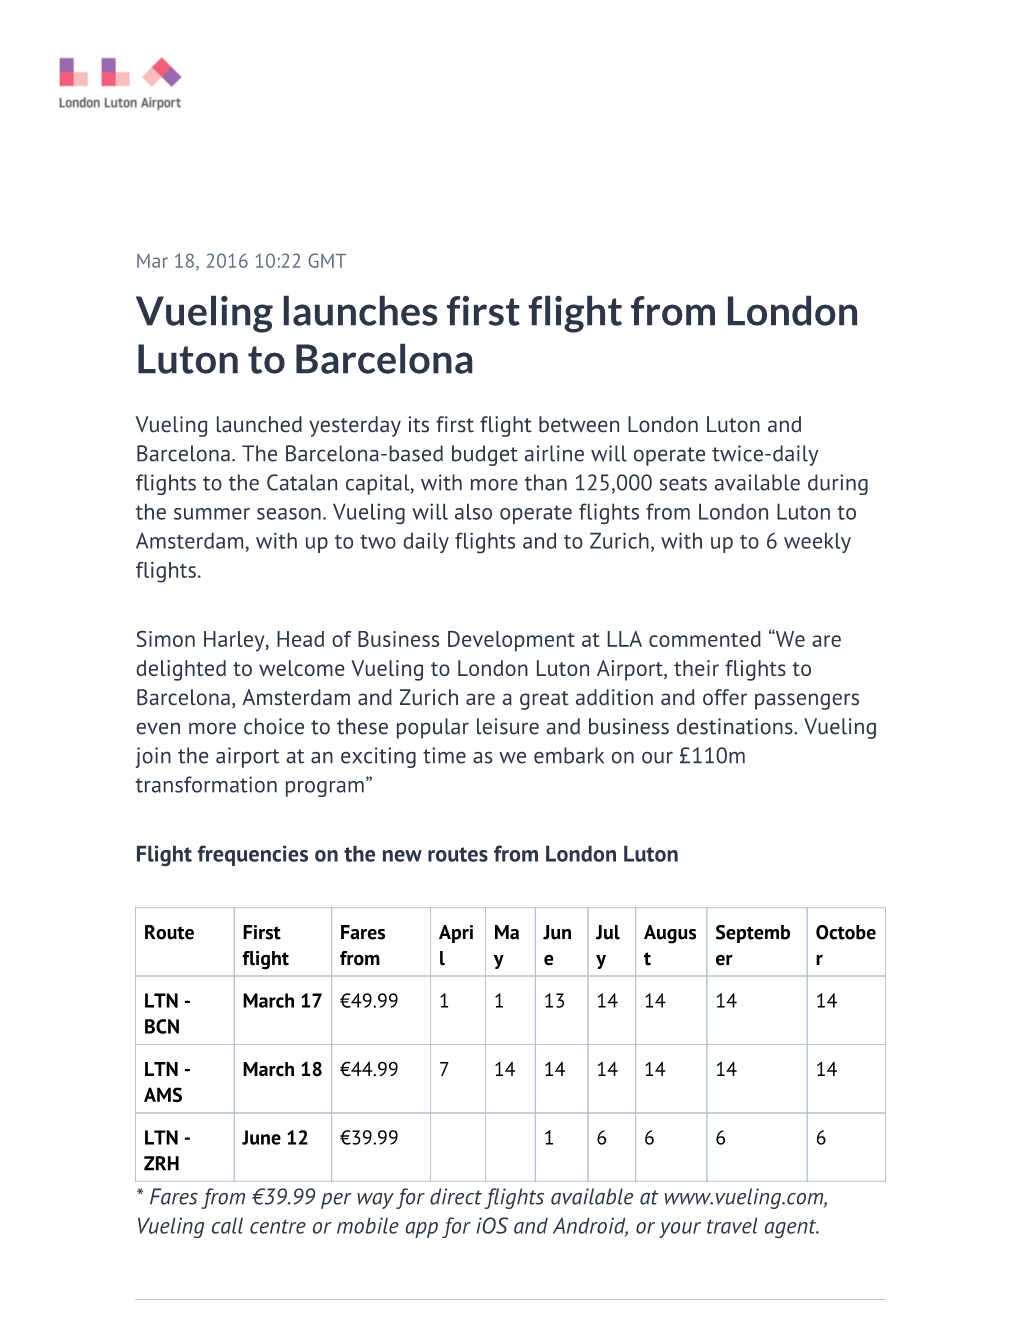 Vueling Launches First Flight from London Luton to Barcelona